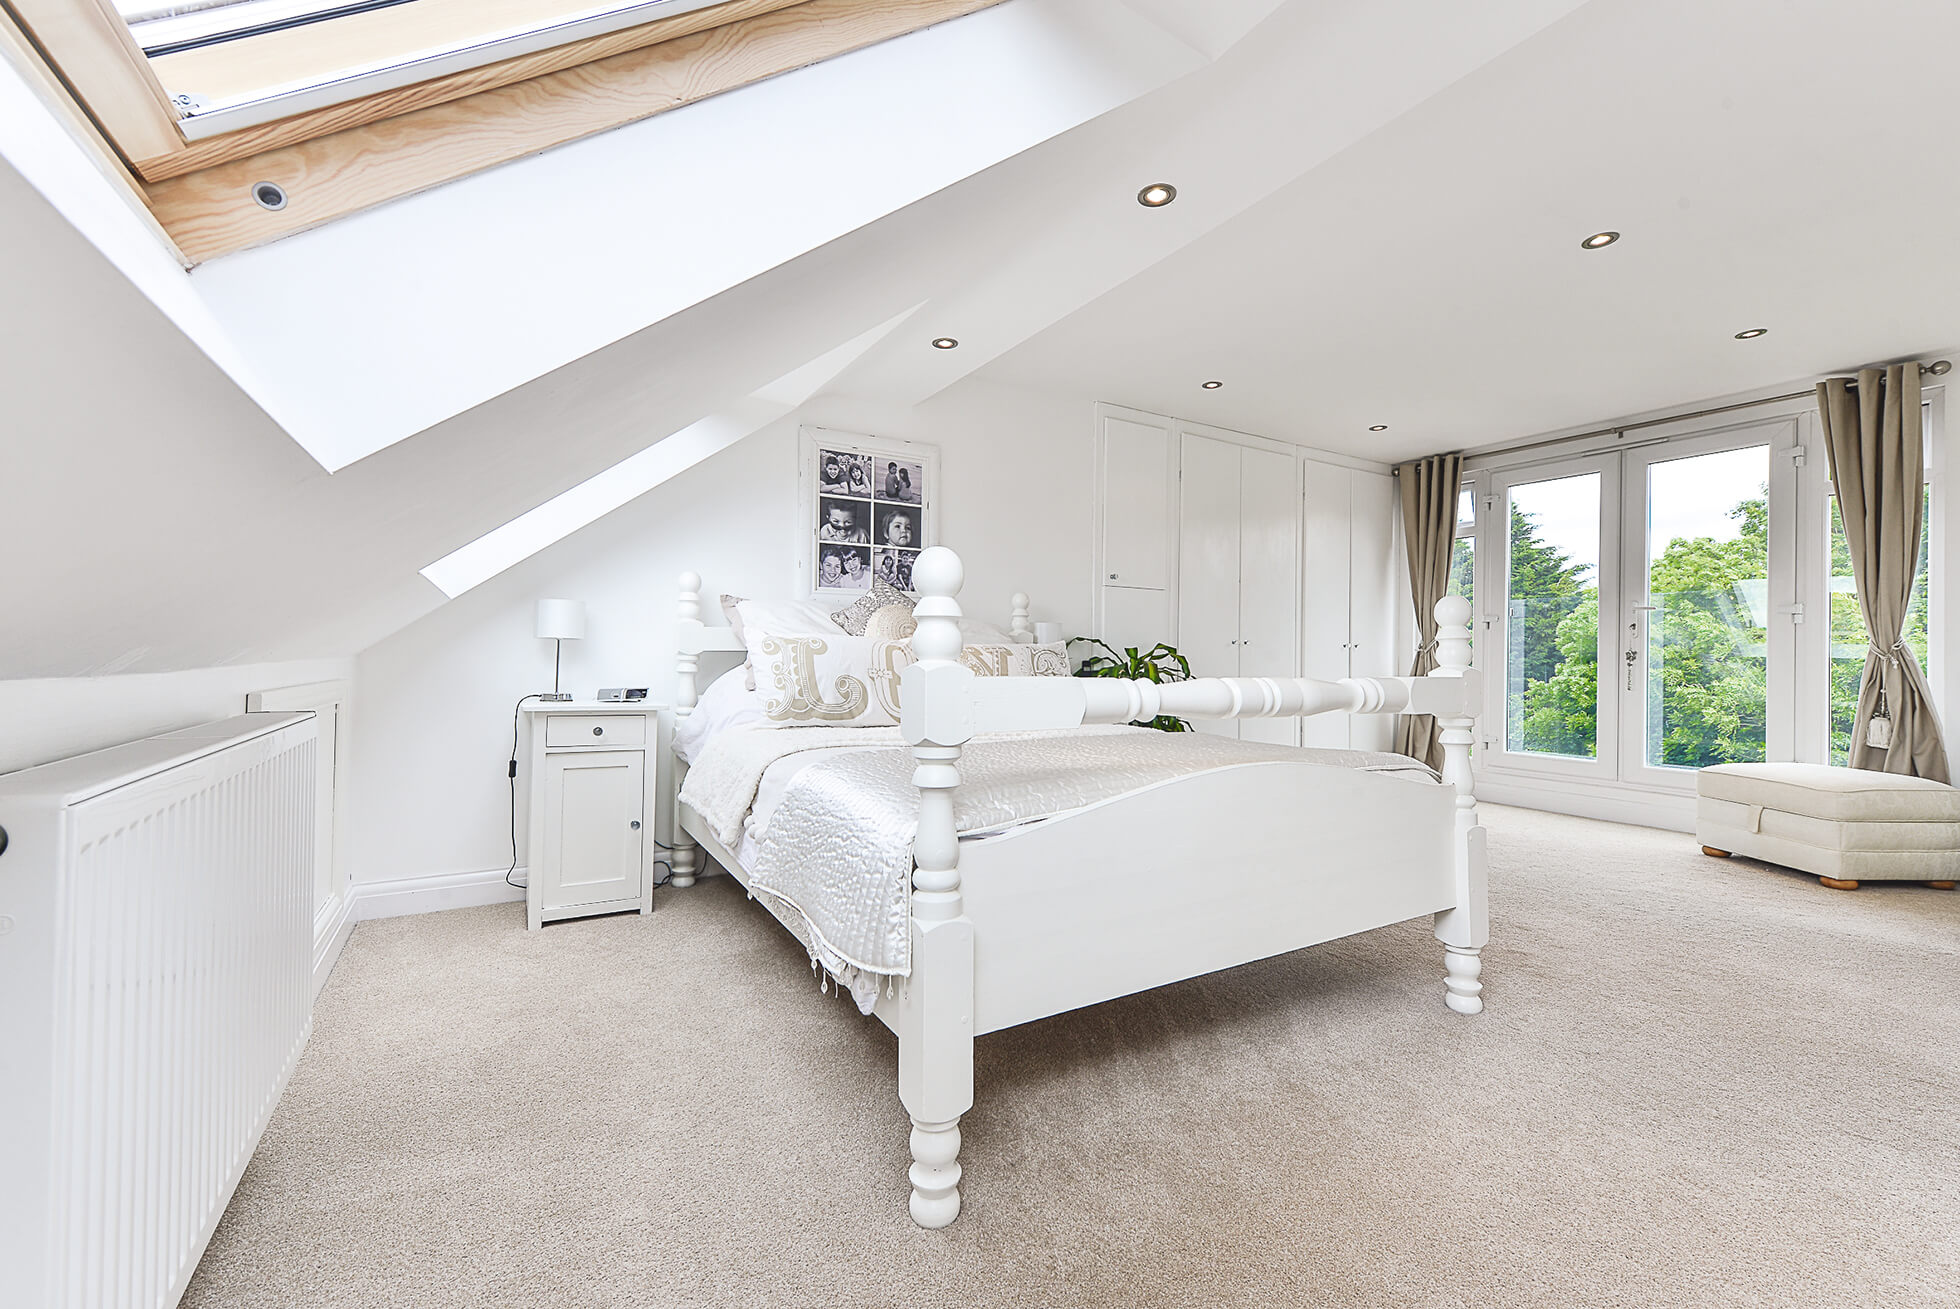 Do you have a question about converting your Loft in Radwell? Here are the most popular questions asked by our clients.